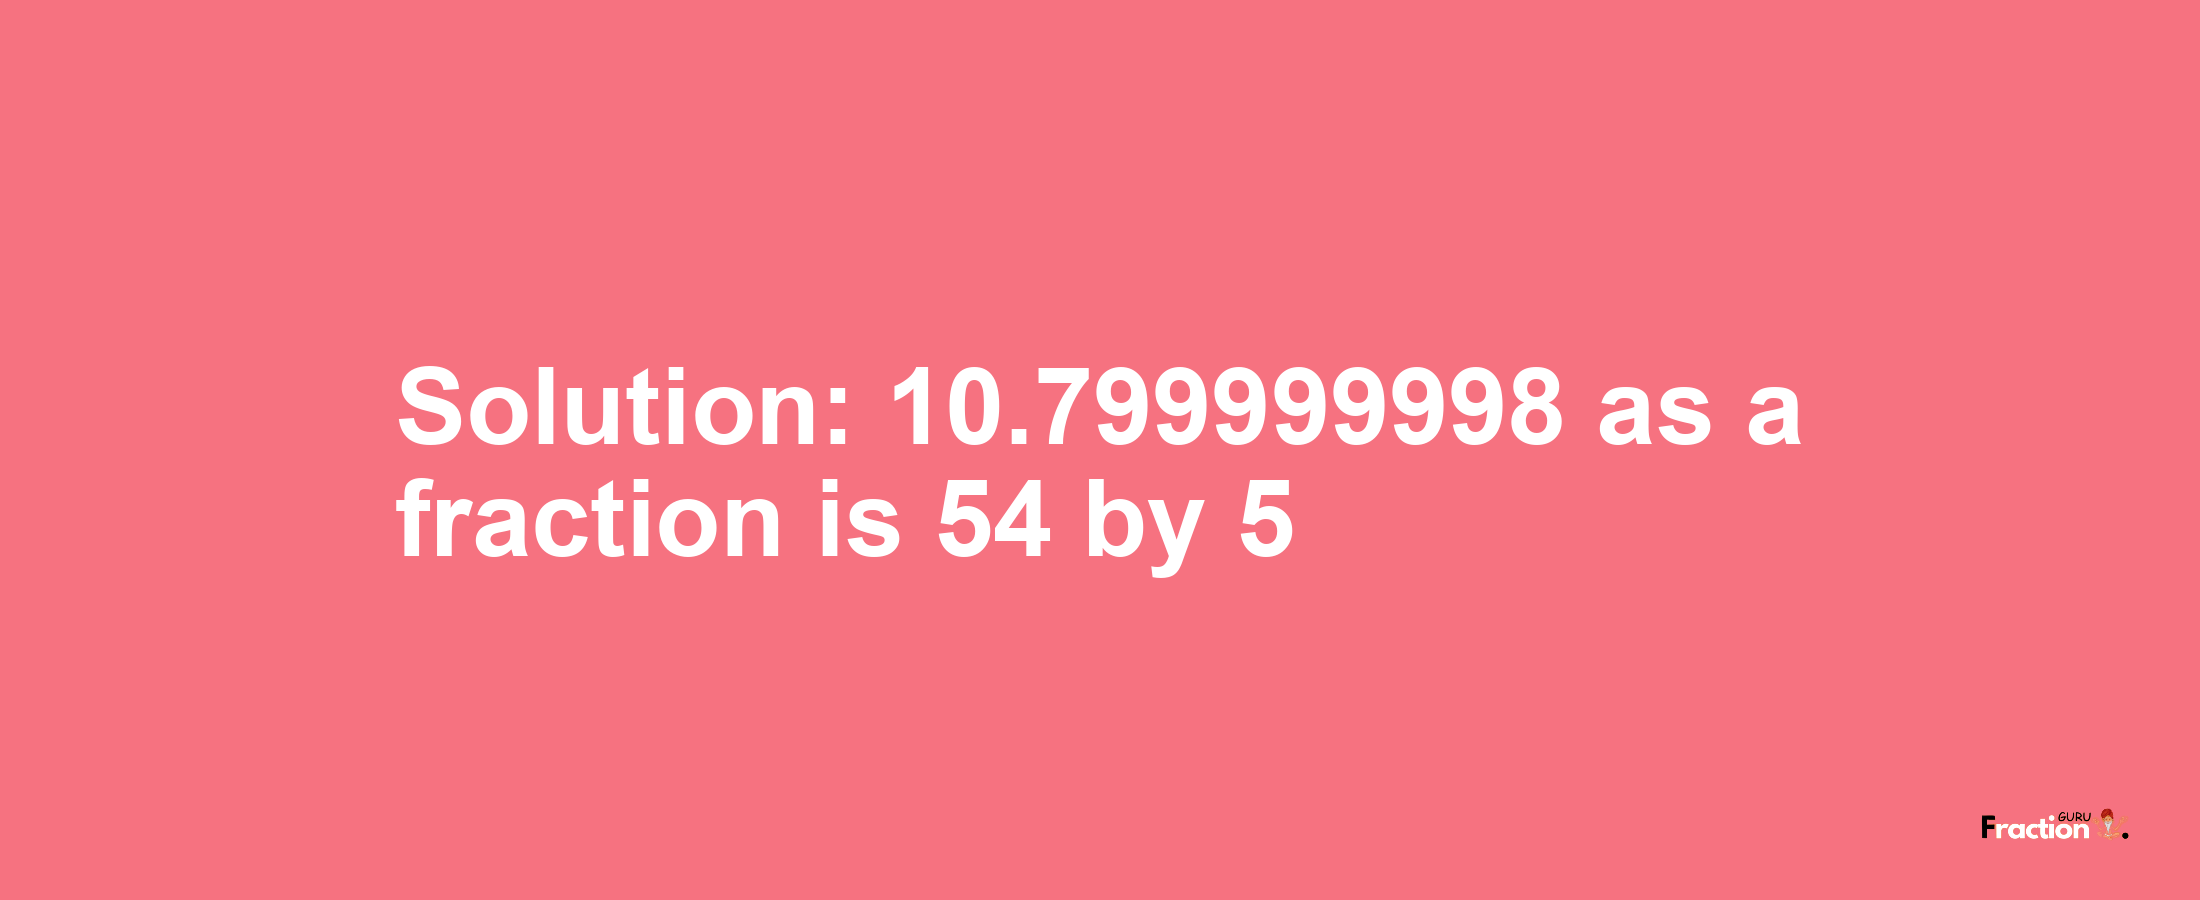 Solution:10.799999998 as a fraction is 54/5